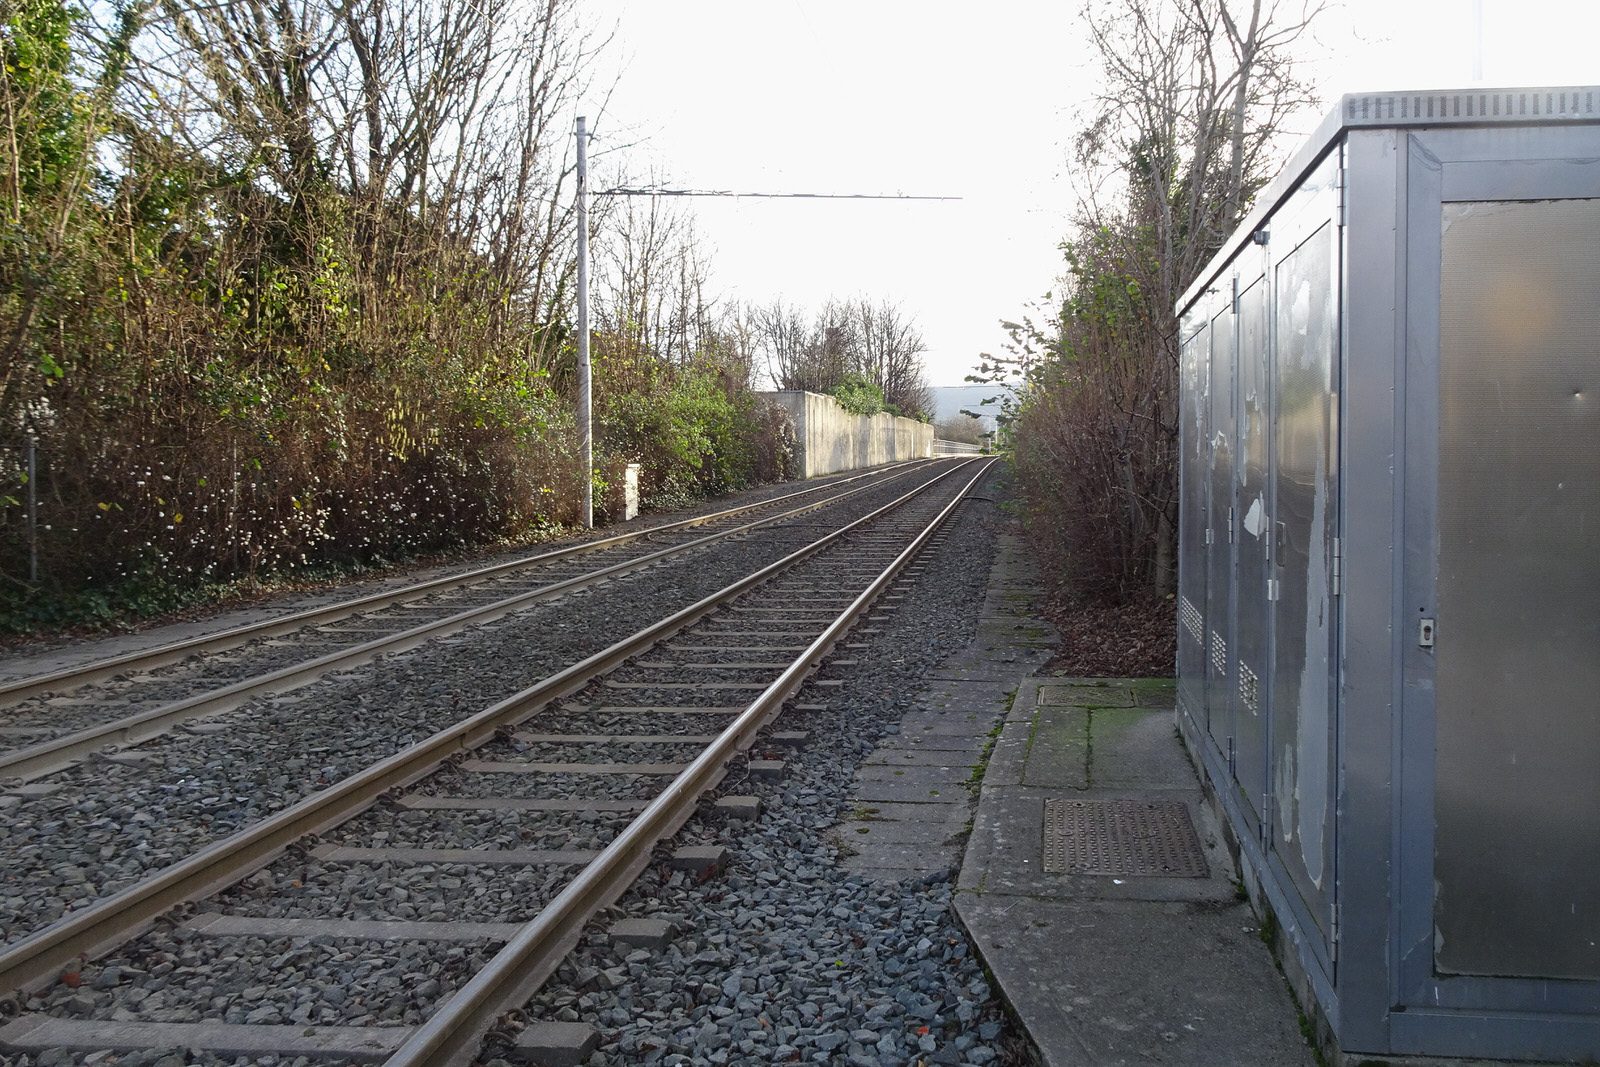 THE MILLTOWN LUAS TRAM STOP A FEW DAYS BEFORE CHRISTMAS DAY [AND NEARBY]-226262-1